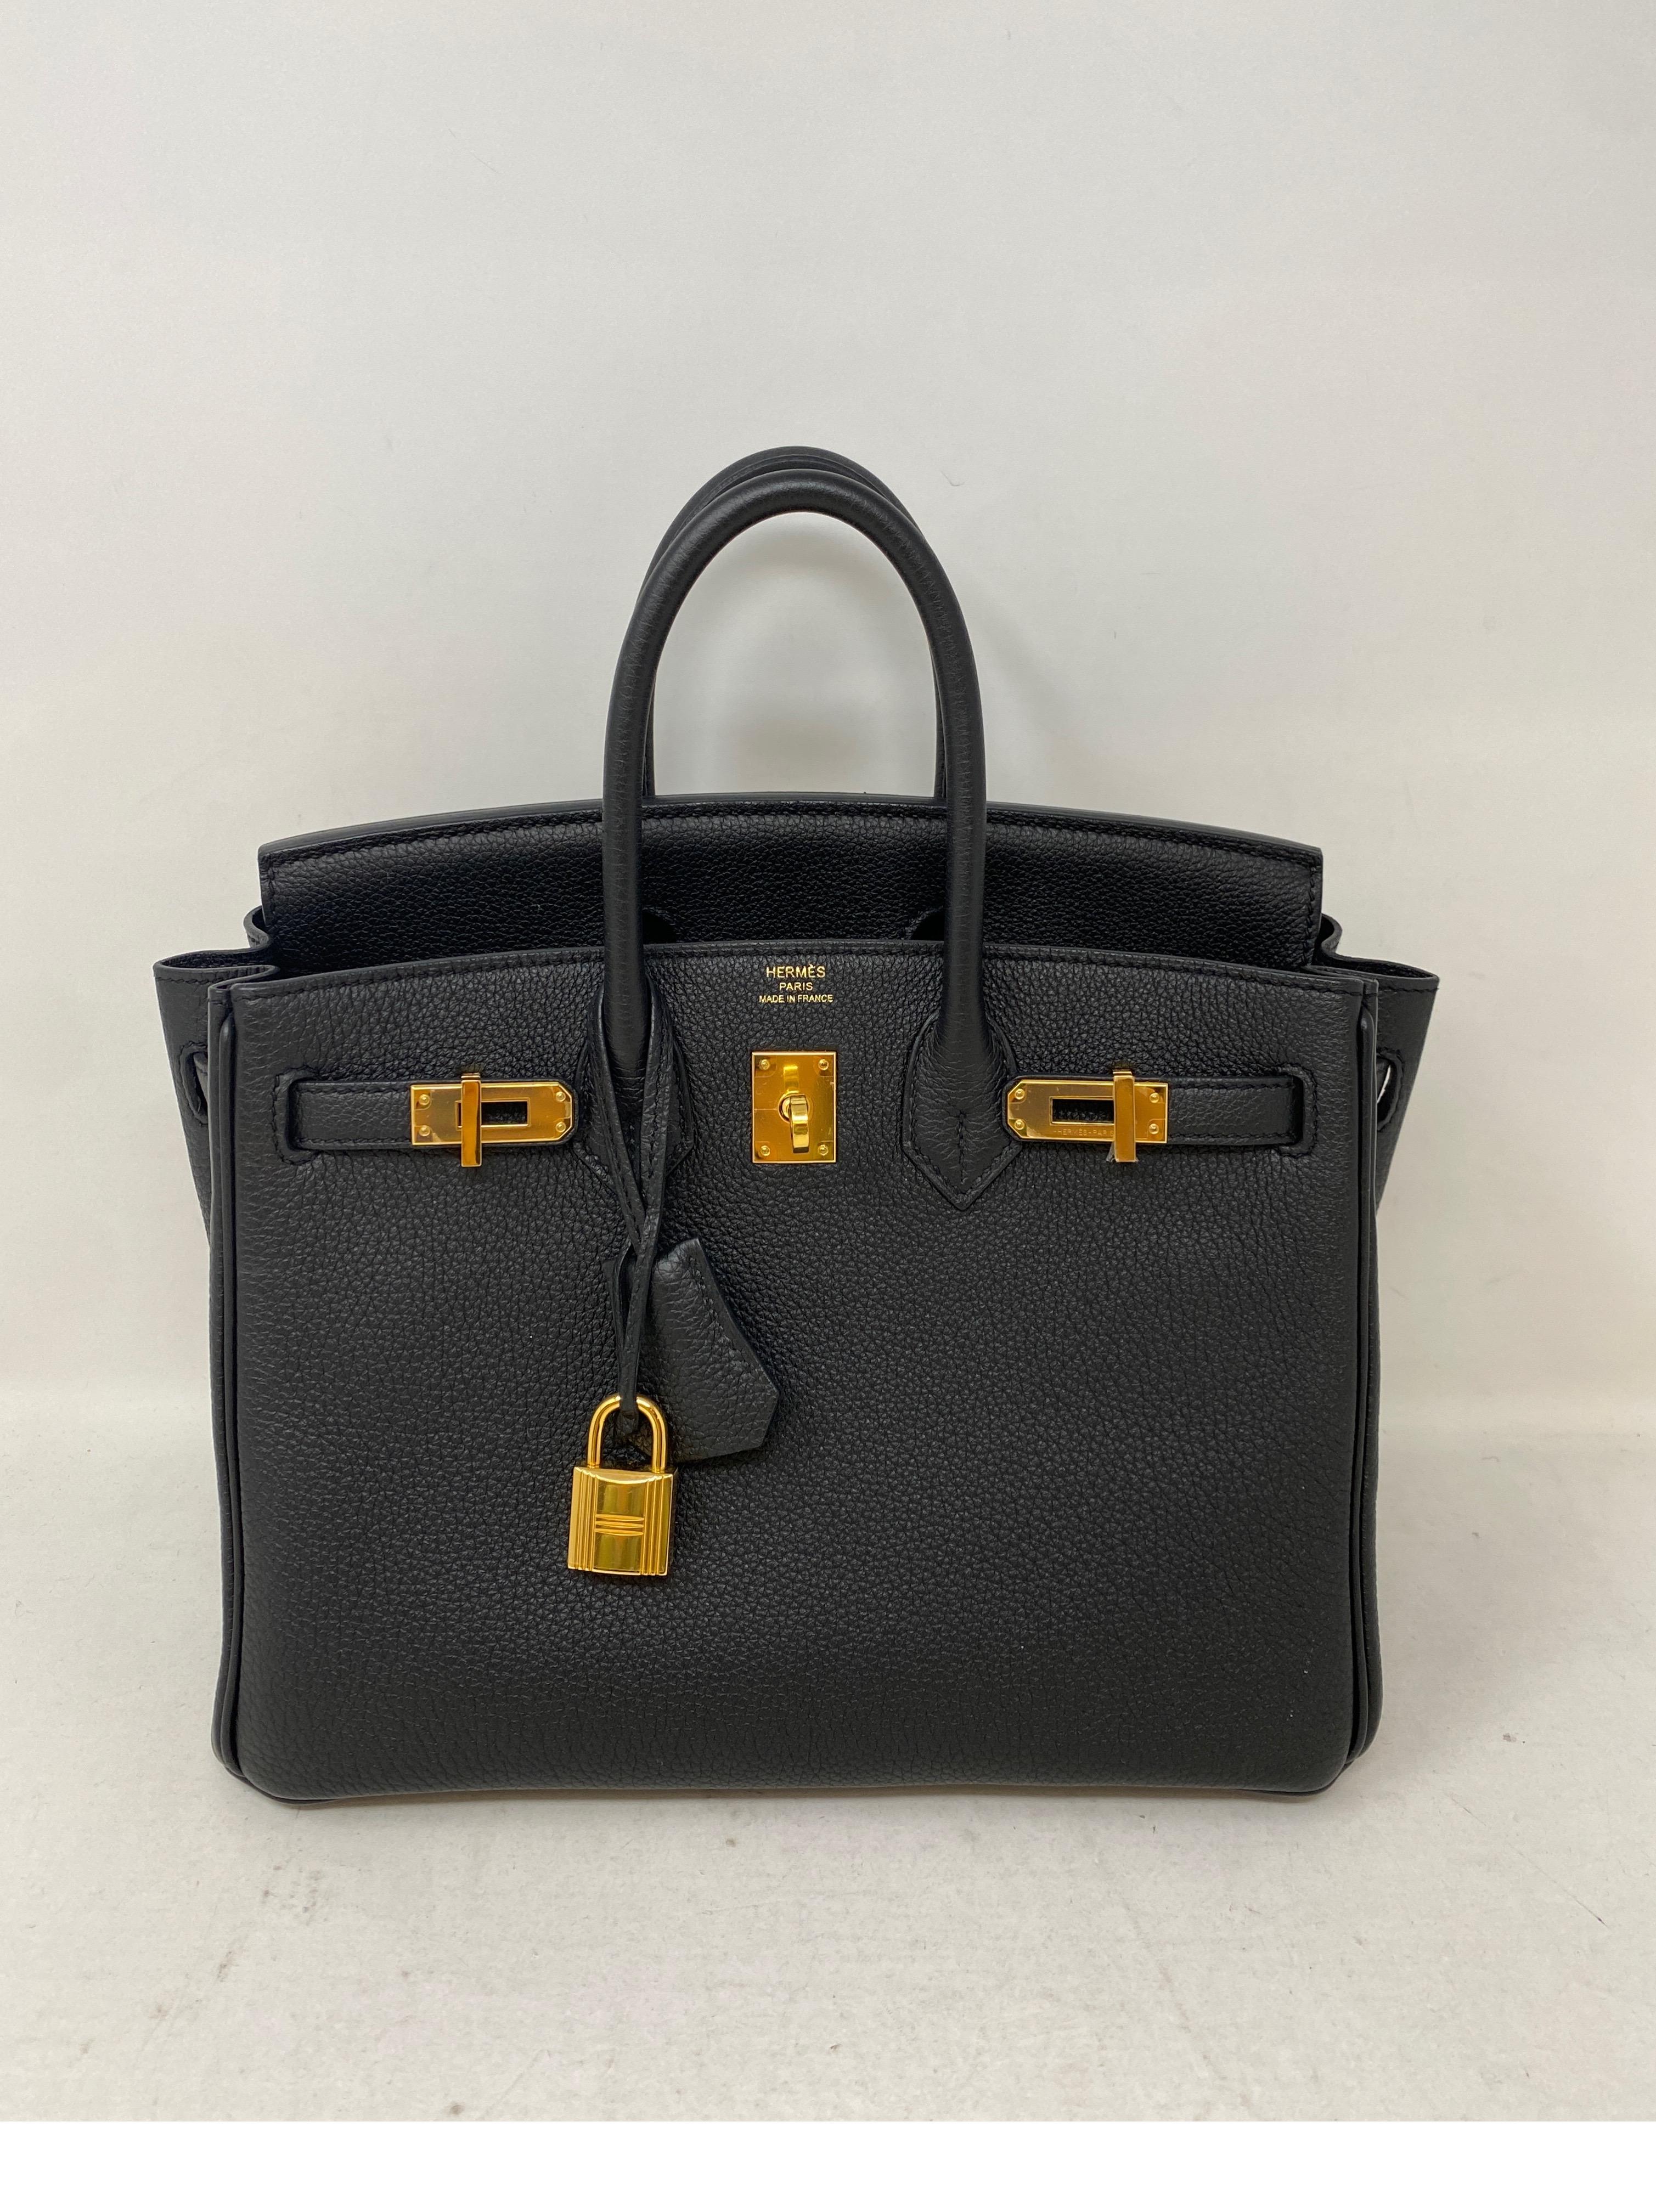 Hermes Black Birkin 25 Bag. Gold hardware. The most wanted size and color combination. The Unicorn for Birkin bags. Excellent condition. Includes clochette, lock, keys, and dust bag. Guaranteed authentic. Won't last. Don't miss out. 